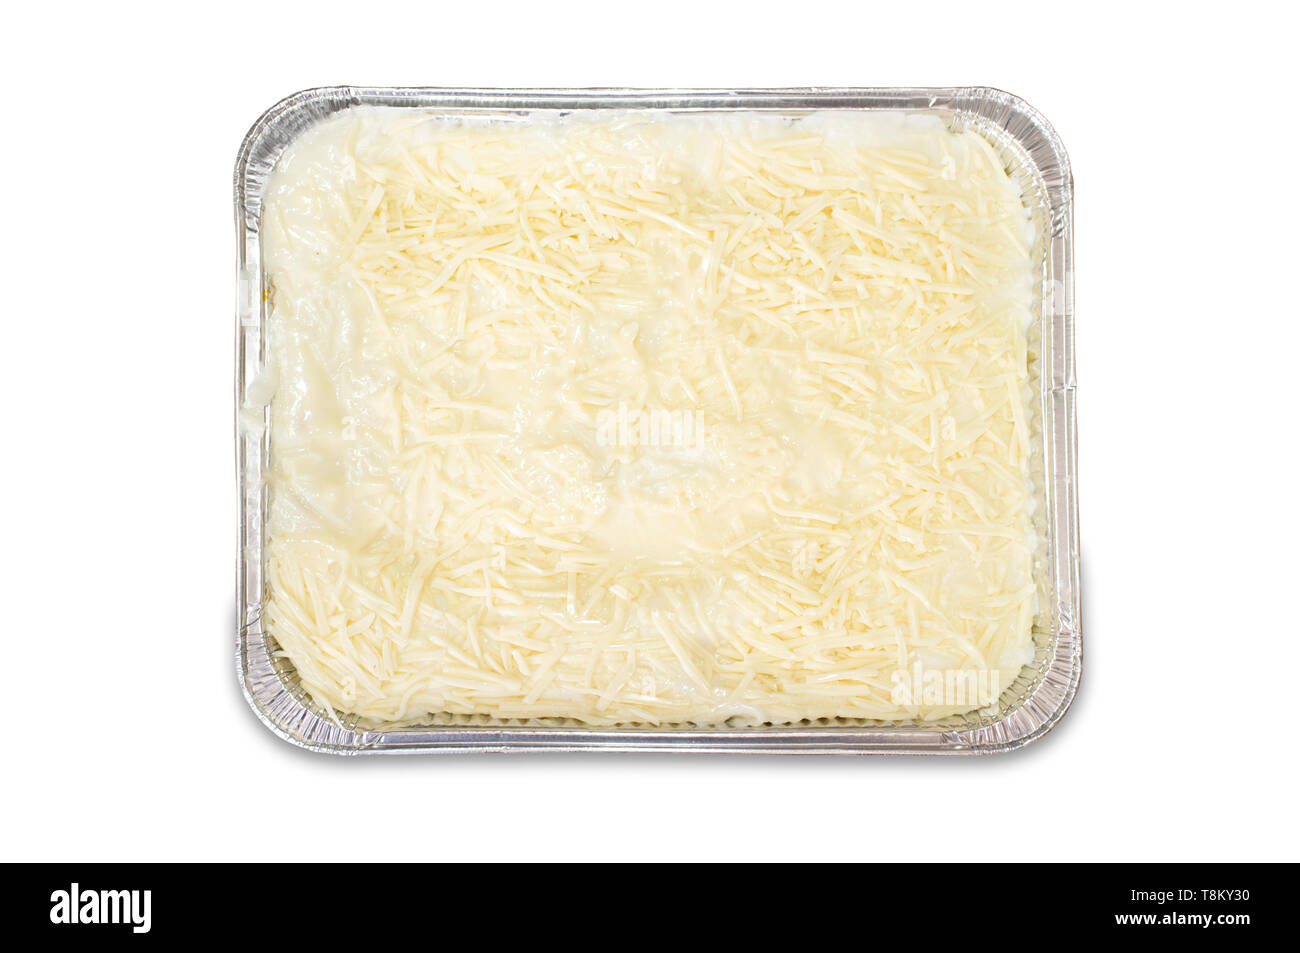 Pre-cooked cold lasagne foil tray. Isolated over white Stock Photo